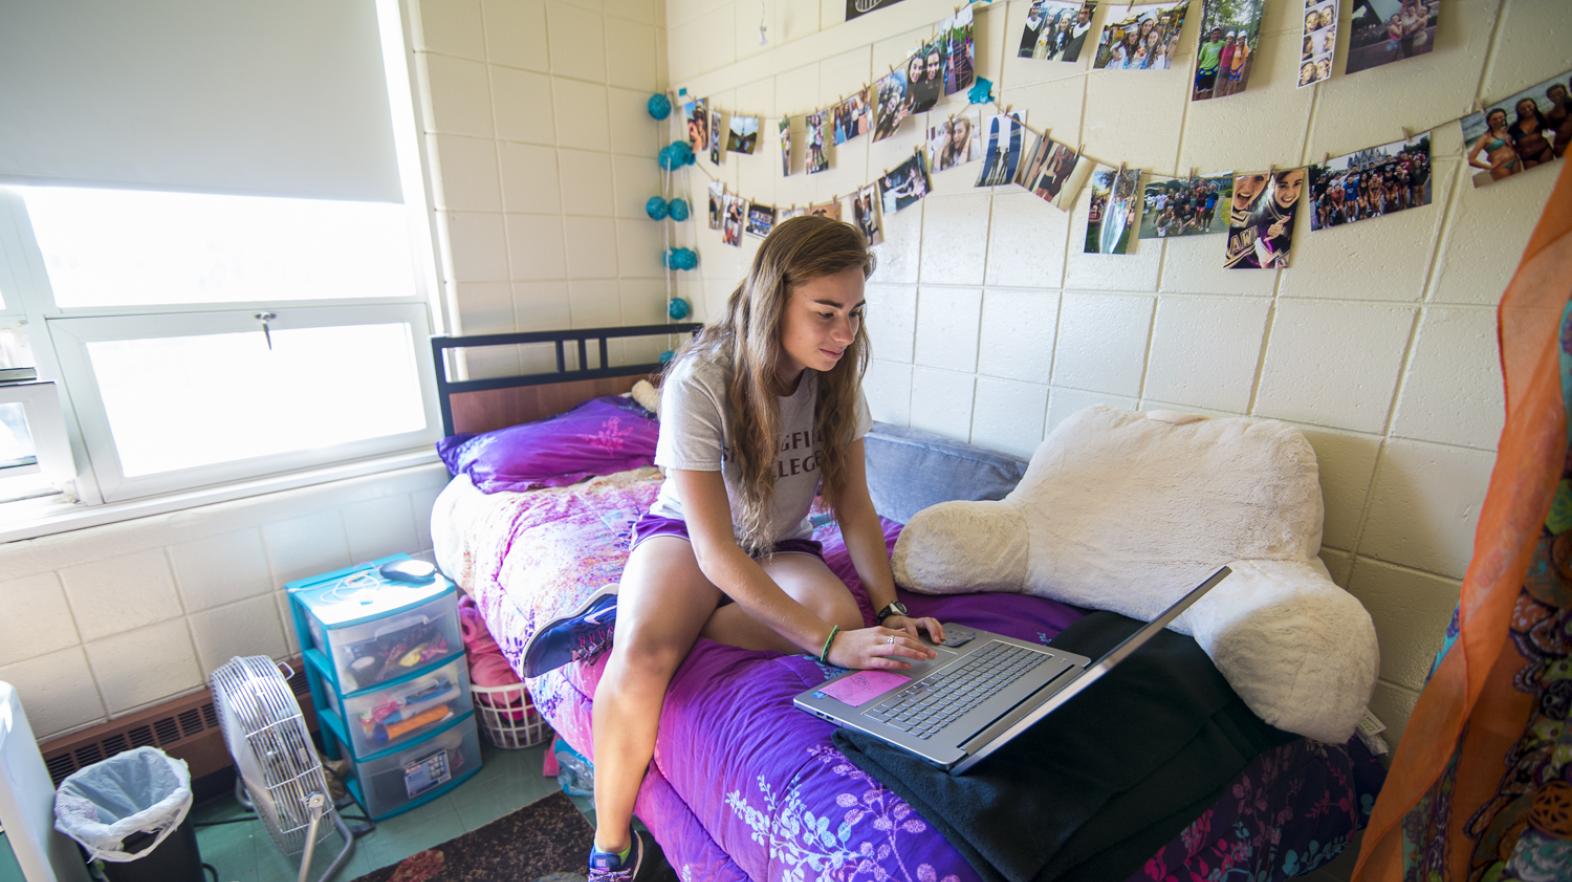 A students works on her laptop in her residence hall room